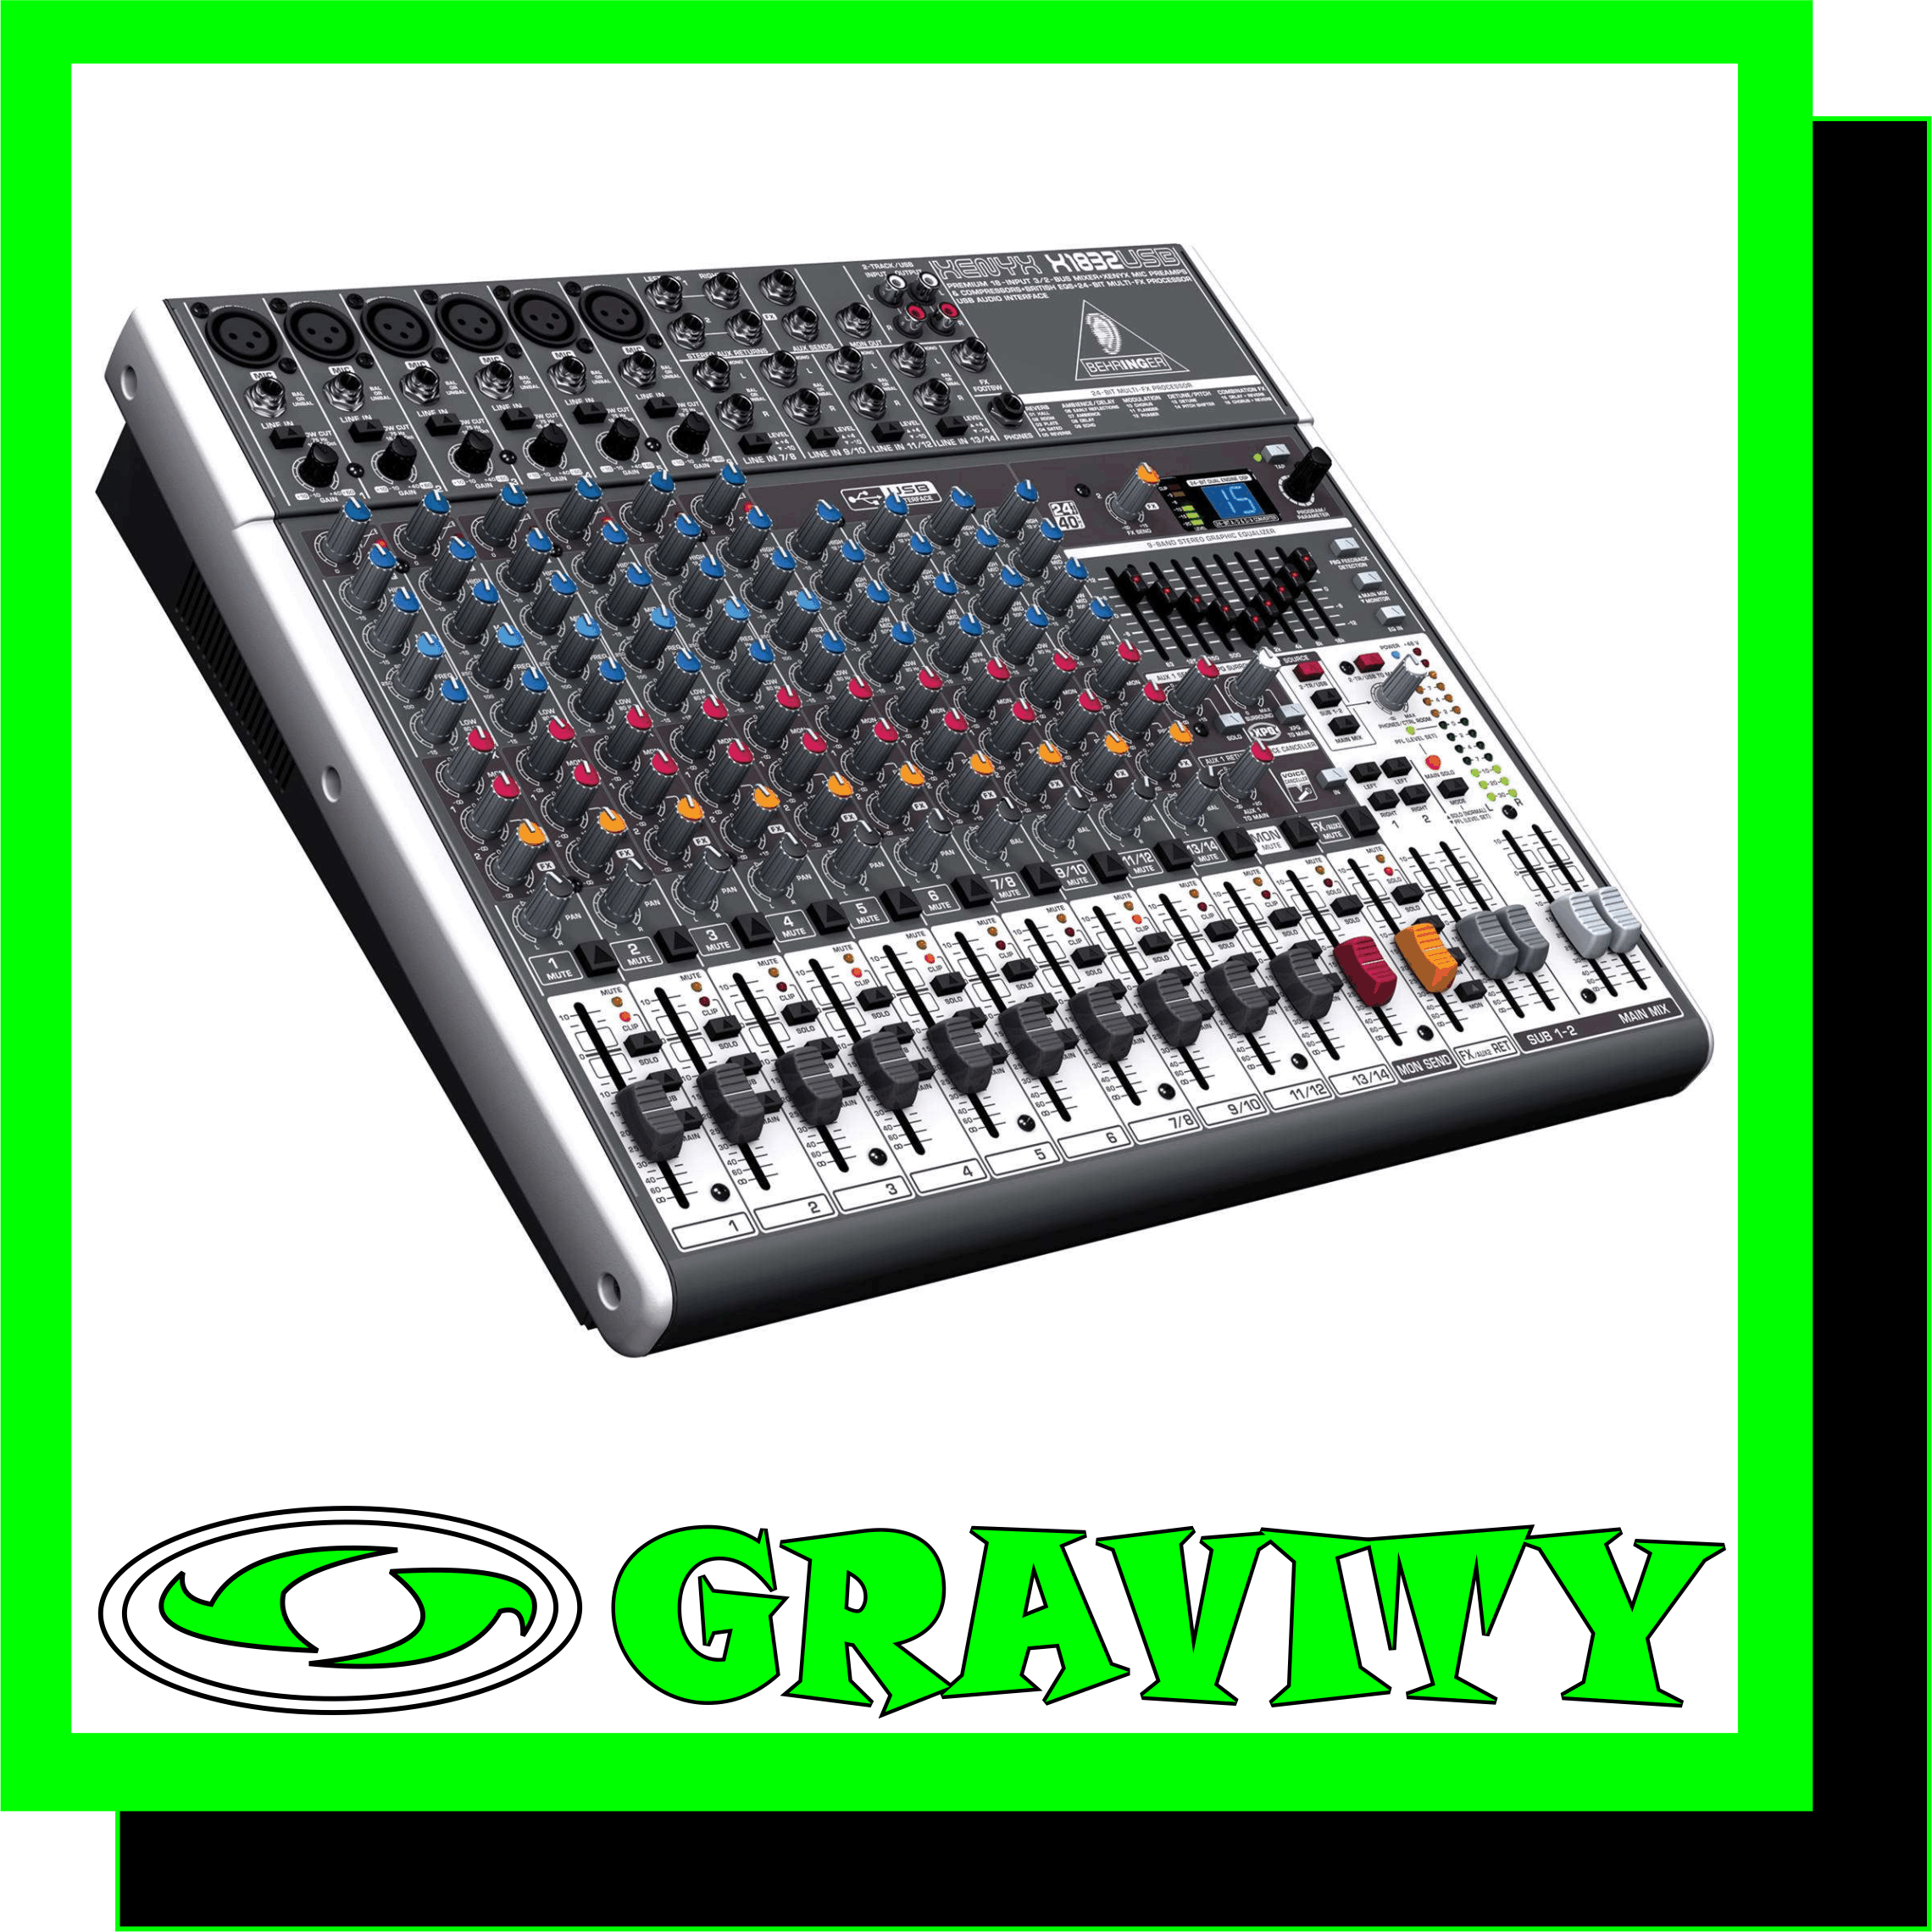 Behringer XENYX X1832USB 18-Input 3/2-Bus Mixer  Product Features: -Premium ultra-low noise, high headroom analog mixer -6 state-of-the-art, phantom-powered XENYX Mic Preamps comparable to stand-alone boutique preamps -6 studio-grade compressors with super-easy “one-knob” functionality and control LED for professional vocal and instrumental sound -Neo-classic “British” 3-band EQs with semi-parametric mid band for warm and musical sound -New studio-grade FX processor with 16 editable presets including reverb, chorus, flanger, delay, pitch shifter, multi-effects, Tap function and storable user parameter   settings -Built-in stereo USB/Audio Interface to connect directly to your computer. Free audio recording, editing and podcasting software plus 150 instrument/effect plug-ins and -ultra-low latency driver downloadable at www.behringer.com -9-band stereo graphic EQ allows precise frequency correction of monitor or main mixes -Revolutionary FBQ Feedback Detection System instantly reveals critical frequencies -Breathtaking XPQ 3D stereo surround effect for more vitality and enhanced stereo image -Voice Canceller function for easy-to-use sing-along applications -Channel inserts on each mono channel for flexible connection of outboard equipment -3 aux sends per channel: 1 pre fader for monitoring, 1 pre/post fader switchable for monitoring/FX applications, 1 post fader (for internal FX or as external send) -Clip LEDs, mute, main mix and subgroup routing switches, solo and PFL functions on all channels -2 subgroups with separate outputs for added routing flexibility and 2 multi-functional stereo aux returns with flexible routing -Balanced main mix outputs with ¼” jack and gold-plated XLR connectors, separate control room, headphones and stereo rec outputs -Control room/phones outputs with multi-input source matrix; rec inputs assignable to main mix or control room/phones outputs -“Planet Earth” switching power supply for maximum flexibility (100 – 240 V~), noise-free audio, superior transient response plus low power consumption for energy saving -High-quality components and exceptionally rugged construction ensure long life -Conceived and designed by BEHRINGER Germany  The feature-packed XENYX X1832USB mixer allows you to effortlessly achieve premium-quality sound thanks to 6 onboard studio-grade XENYX Mic Preamps, and our ultra-musical British channel EQs with a semi-parametric mid band for the maximum fl exibility in sound sculpting. And our easy-to-use one-knob compressors provide total dynamic control for the ultimate in punch and clarity, while respecting all the power and emotion you pack into every note. Add to this our 24-bit, dual-engine Multi-FX processor with 16 editable, professional-grade presets including reverb, chorus, flanger, delay, pitch shifter and multi-effects and the X1832USB becomes an incredibly versatile mixer for your live performances. But XENYX X1832USB wasnt just designed to handle your live gigs; it also provides the state-of-the-art tools you need to make stunning, professional-quality recordings. Along with their built-in USB/audio interfaces, the XENYX X1832USB comes with all the recording and editing software needed to turn your computer system into a complete, high-performance home recording studio.